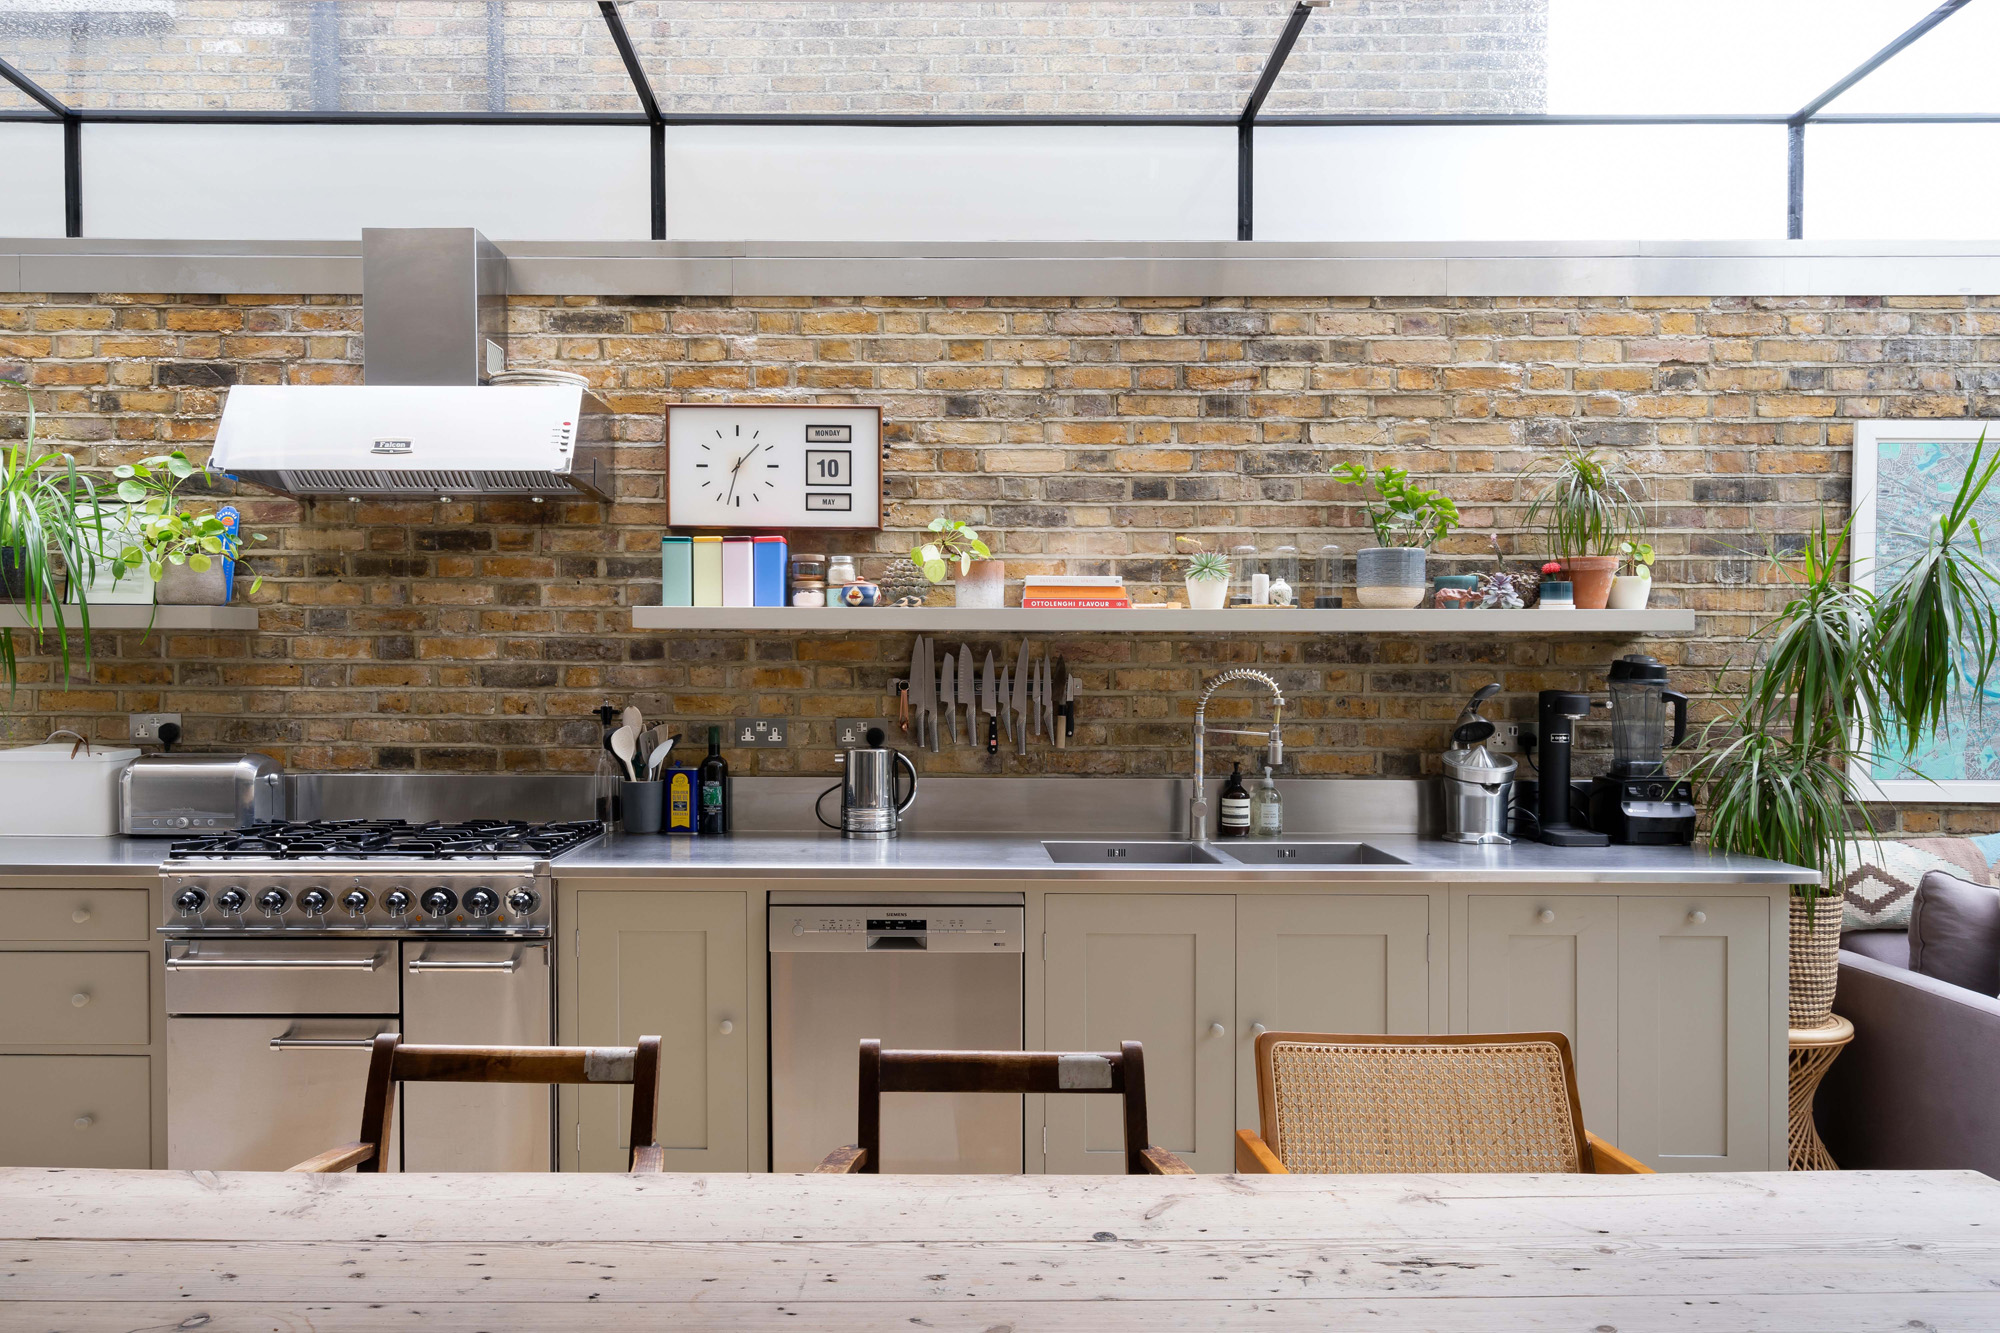 Oxford Gardens NW10 kitchen with exposed brickwork